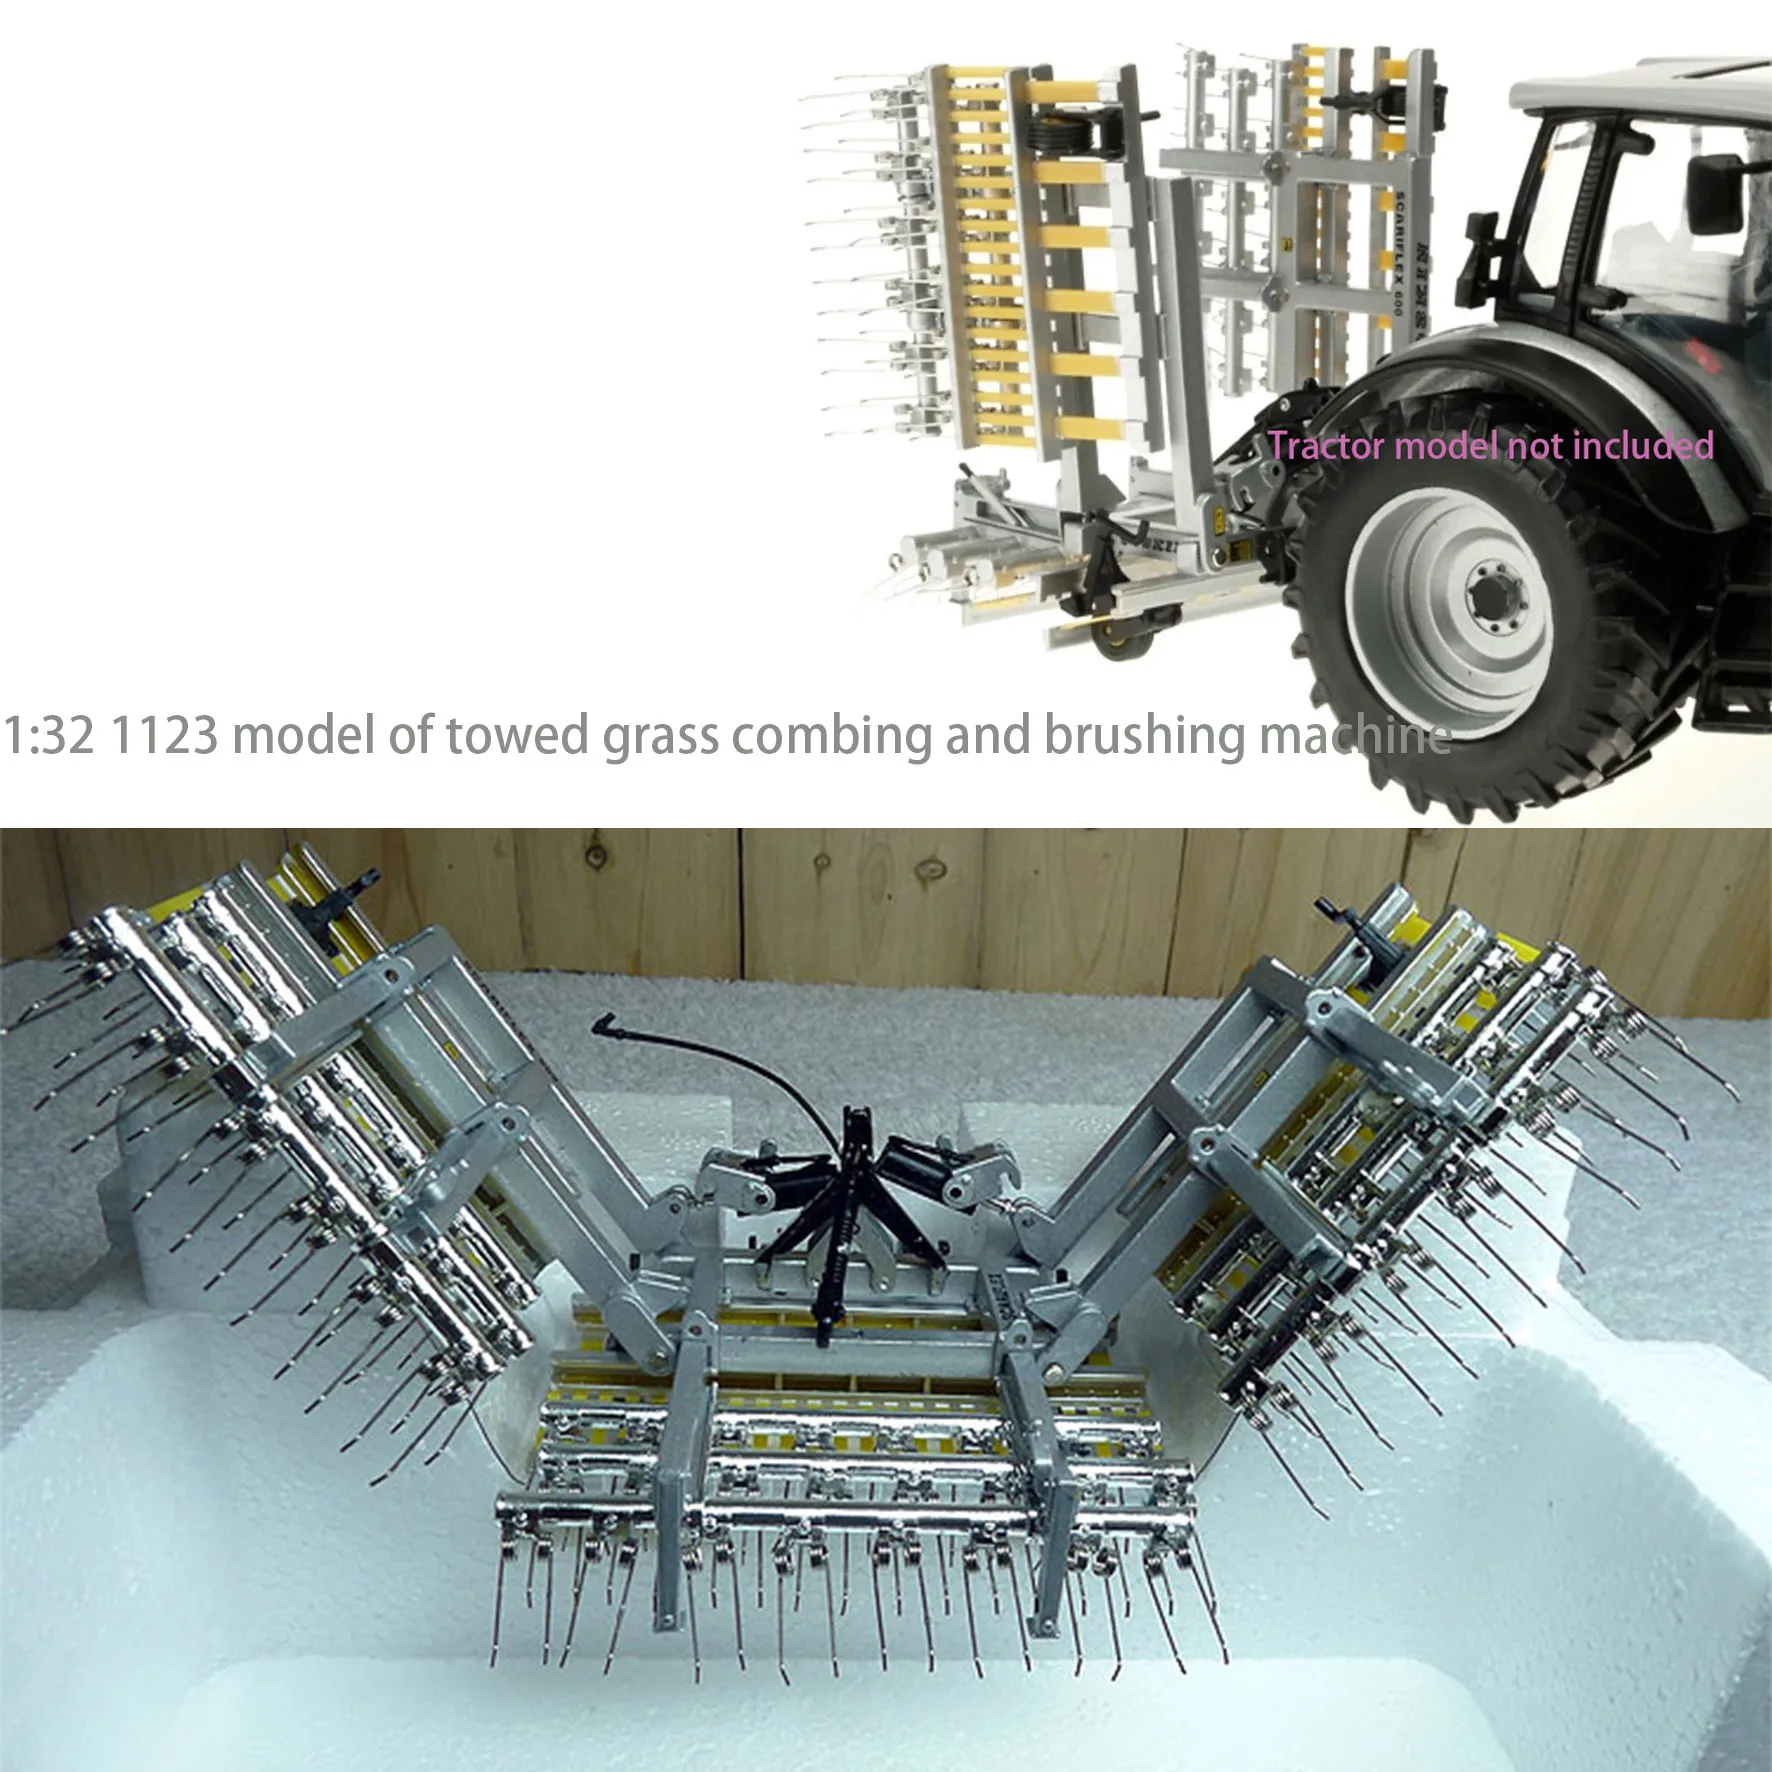 Fine rare 1:32 1123 model of towed grass combing and brushing machine  Tractor accessories  Alloy construction machinery model